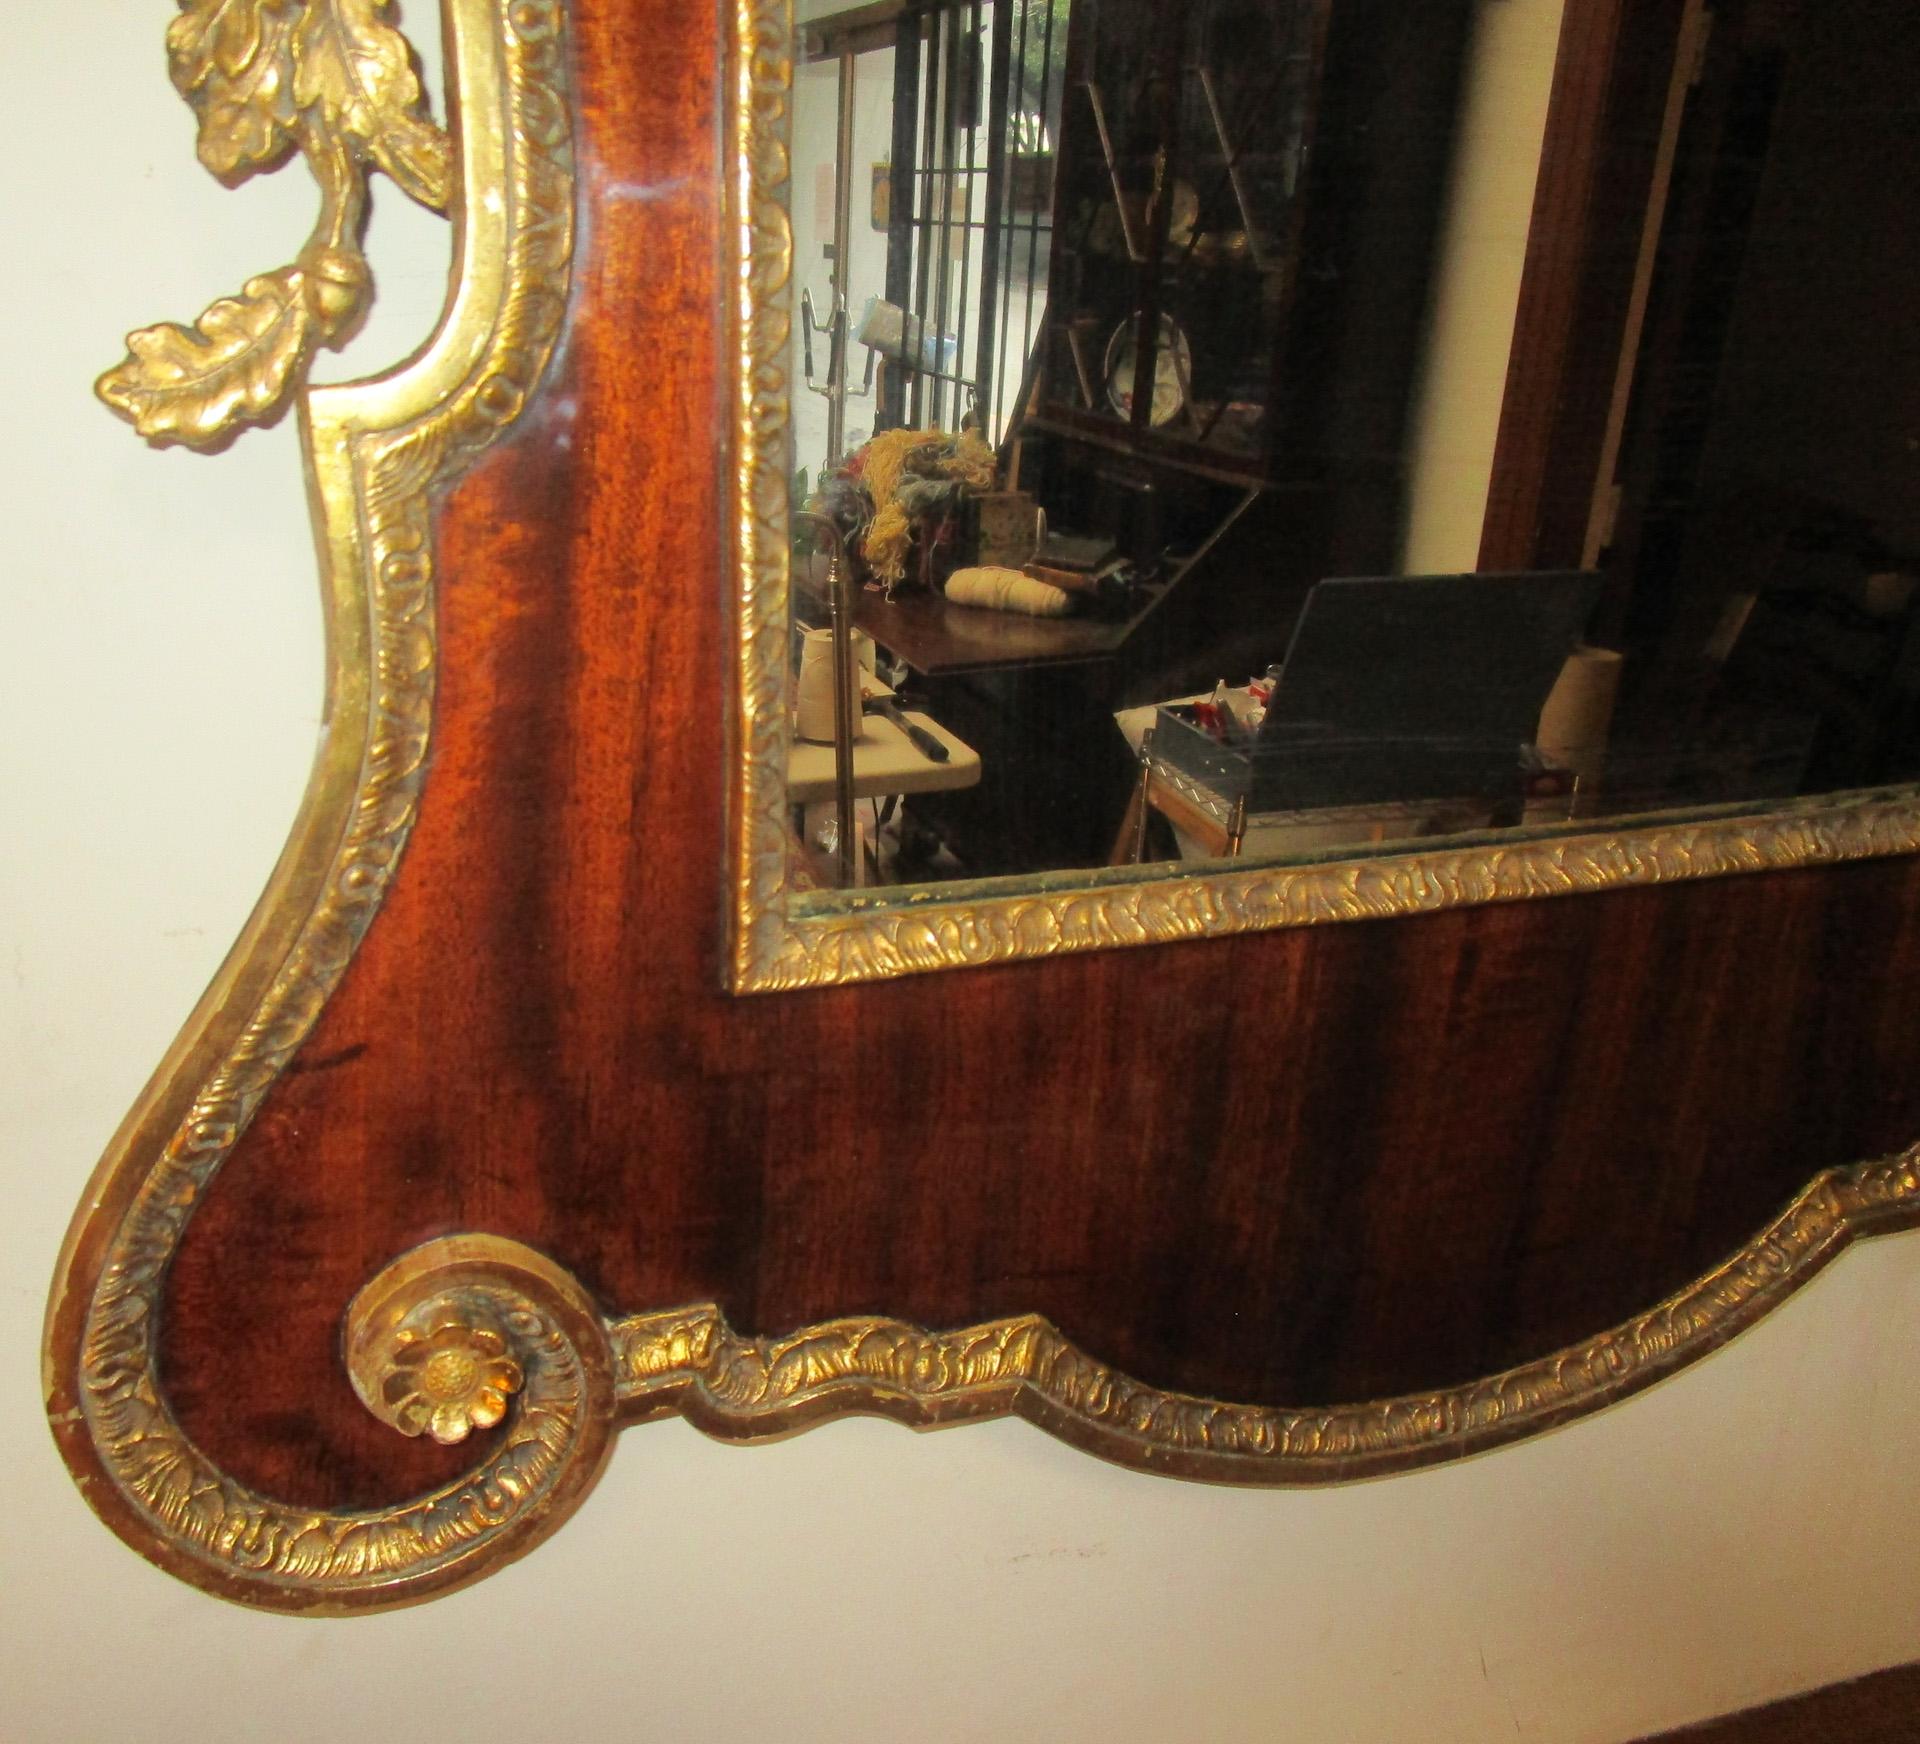 Handsome large size George II period English mirror of beautifully grained mahogany veneers with gilded embellishments. Features includes a broken pediment with center crest and intricate applied gilded foliate side decoration of acorns, oak leaf